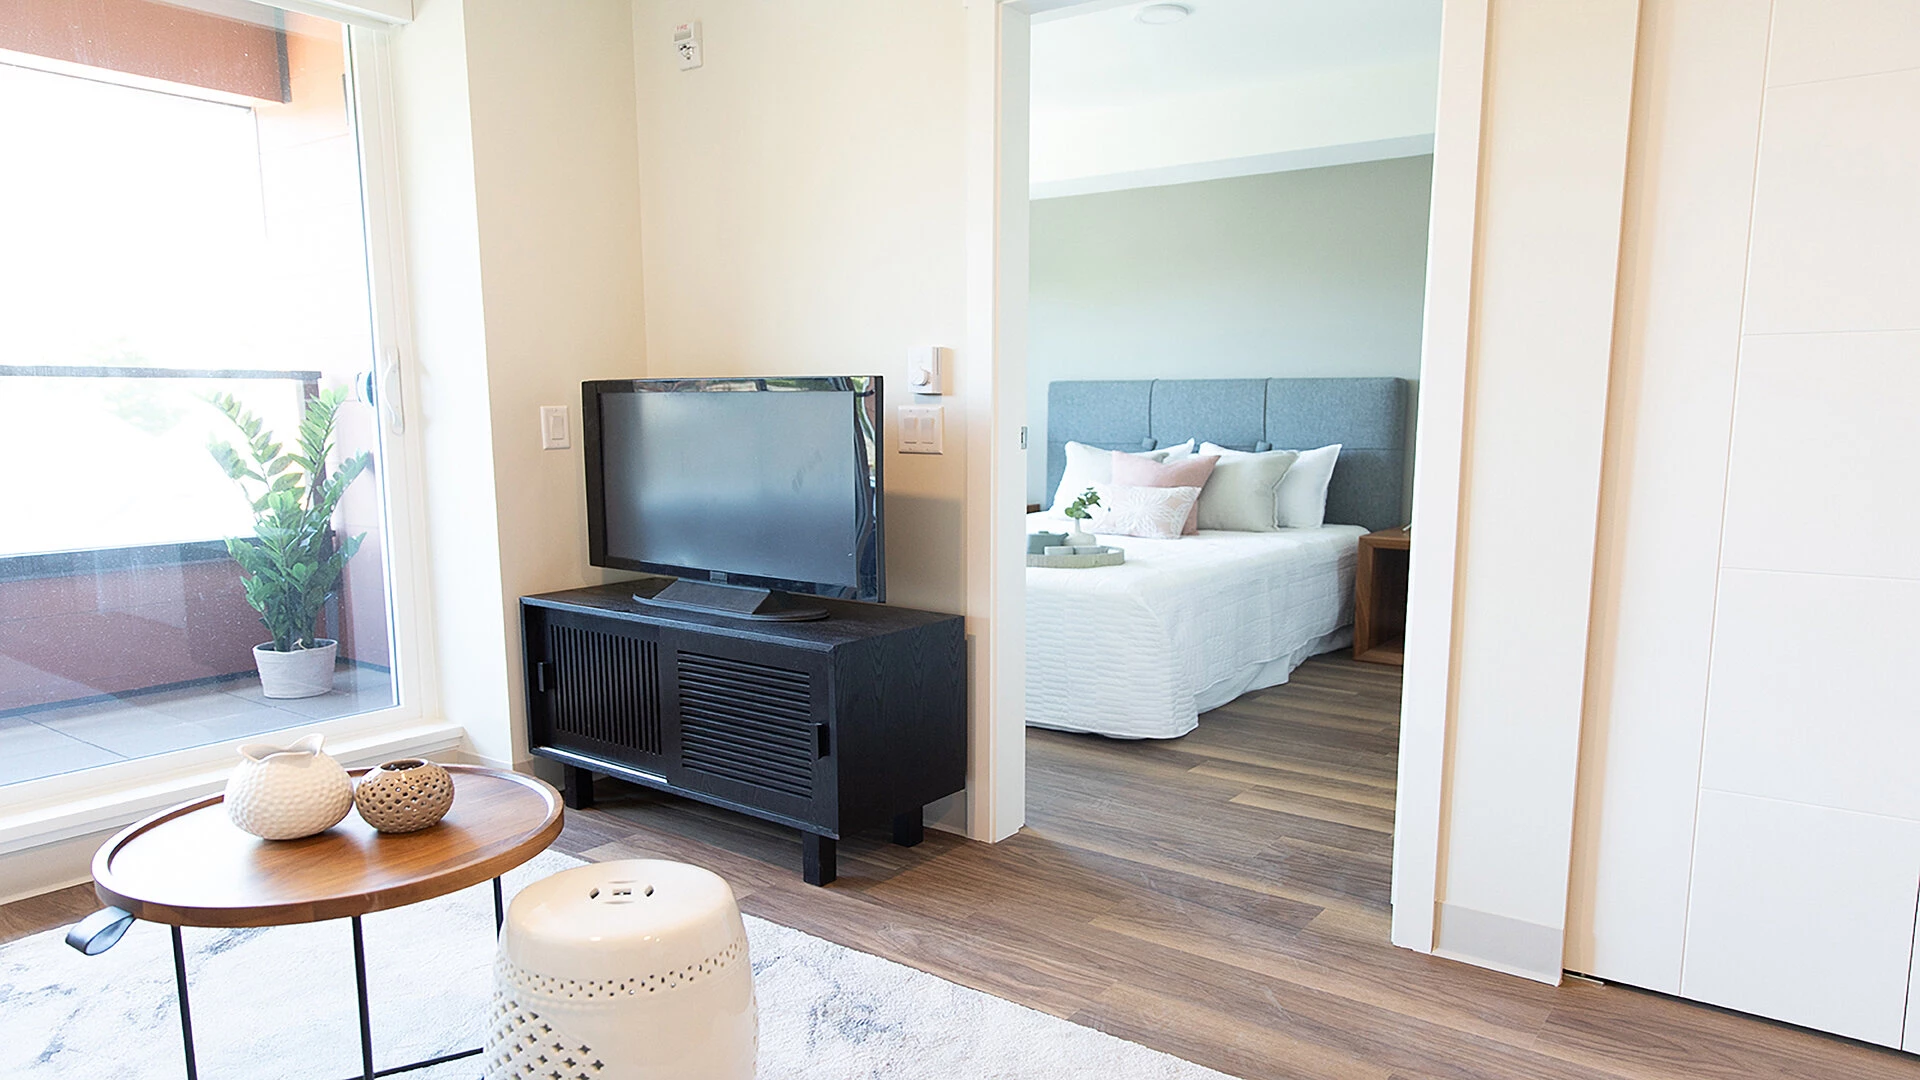 A living room tv and entrance to a Wisteria Place suite bedroom